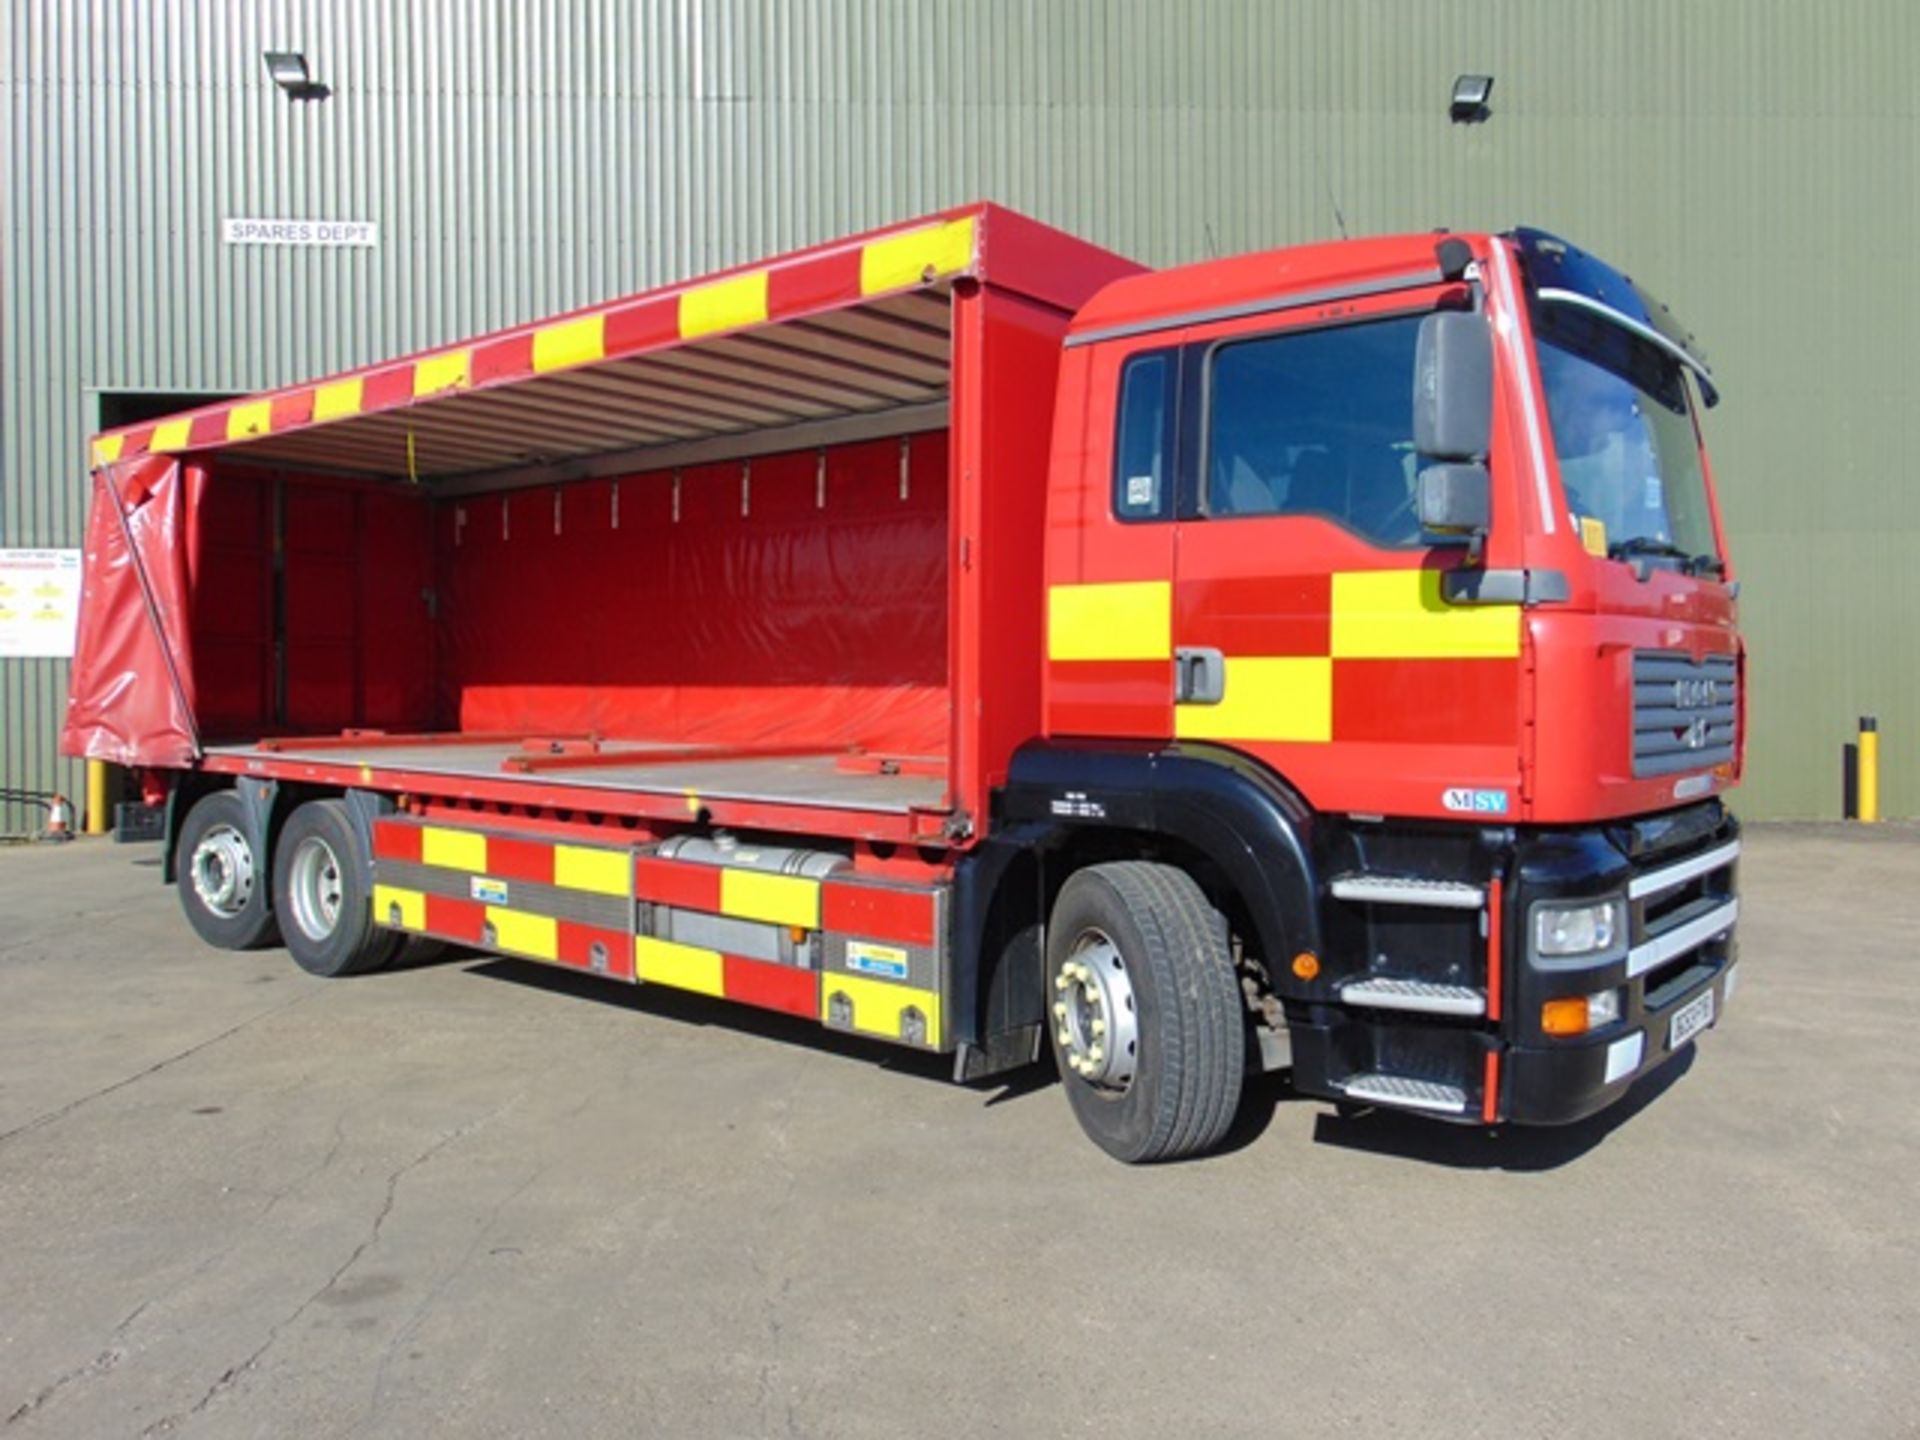 2003 MAN TG-A 6x2 Rear Steer Incident Support Unit - Image 10 of 27